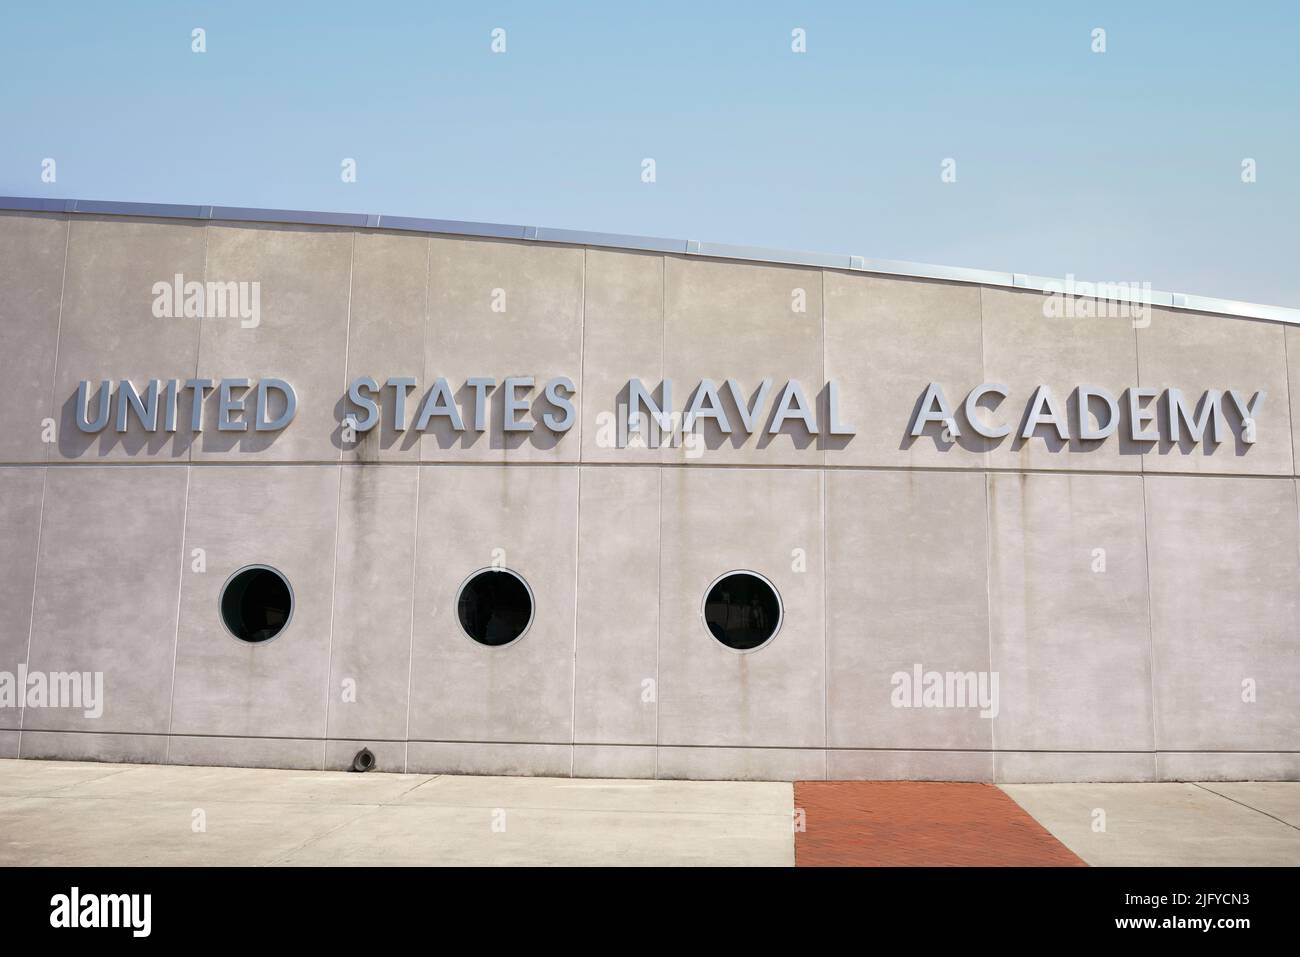 United States Naval Academy in Annapolis, Maryland, USA. Stock Photo